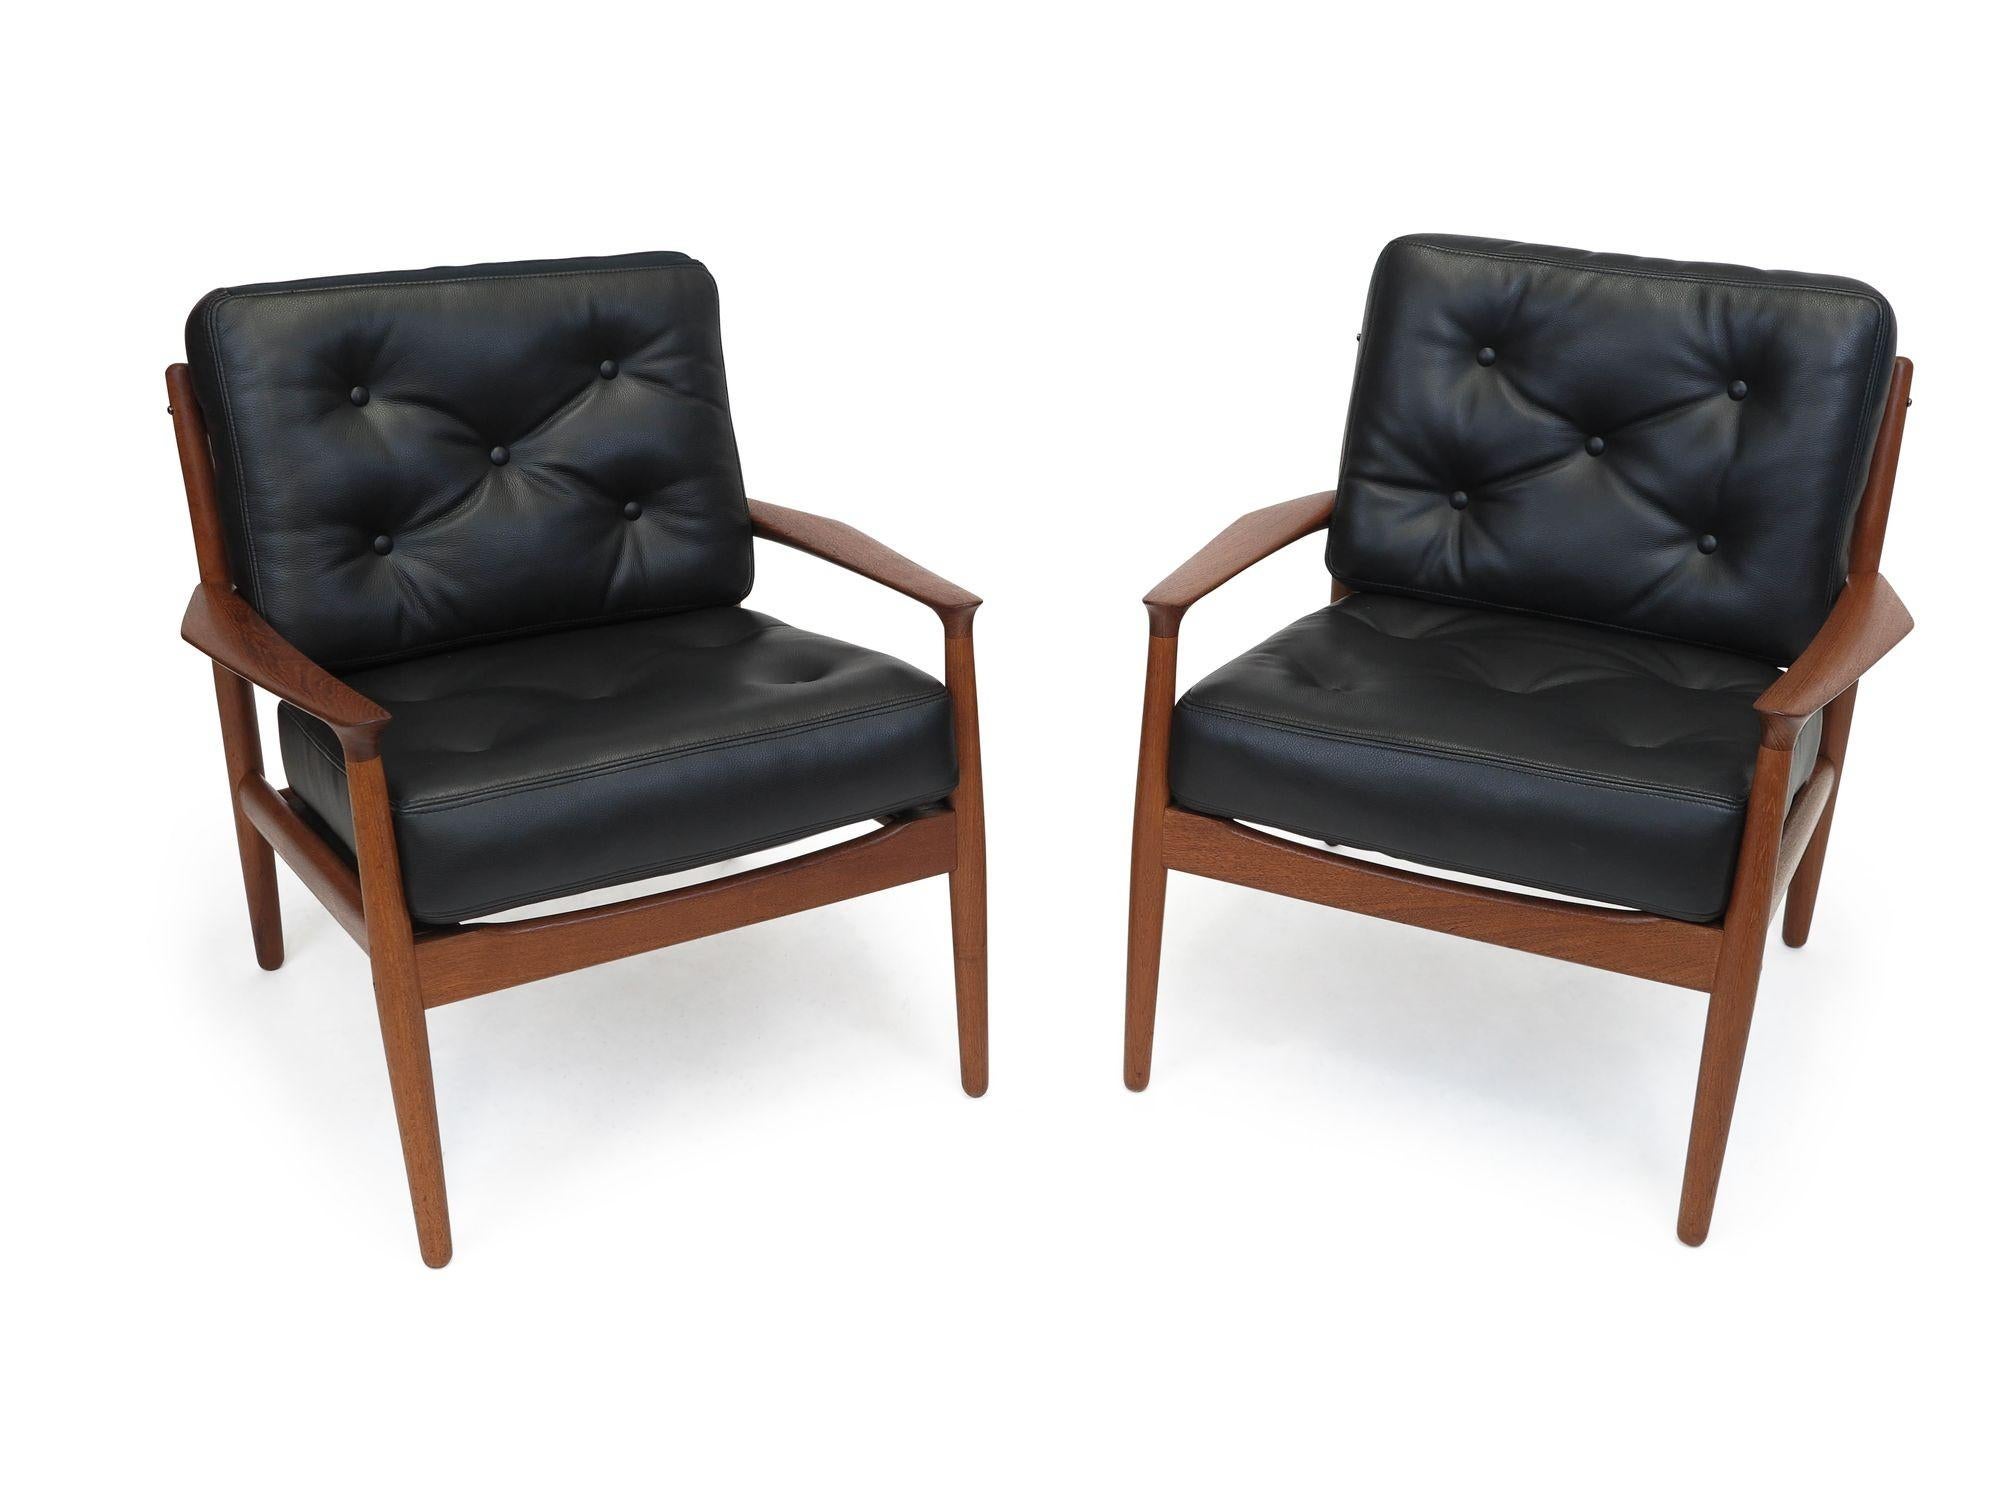 Pair of Danish Modern teak lounge chairs designed by Grete Jalk for Glostrup Mobelfabrik, model 218. Crafted of solid teak frames with sculpted arms newly upholstered in soft black leather with button tufting.
Measurements: 
W 28.75 x D 27.75 x H